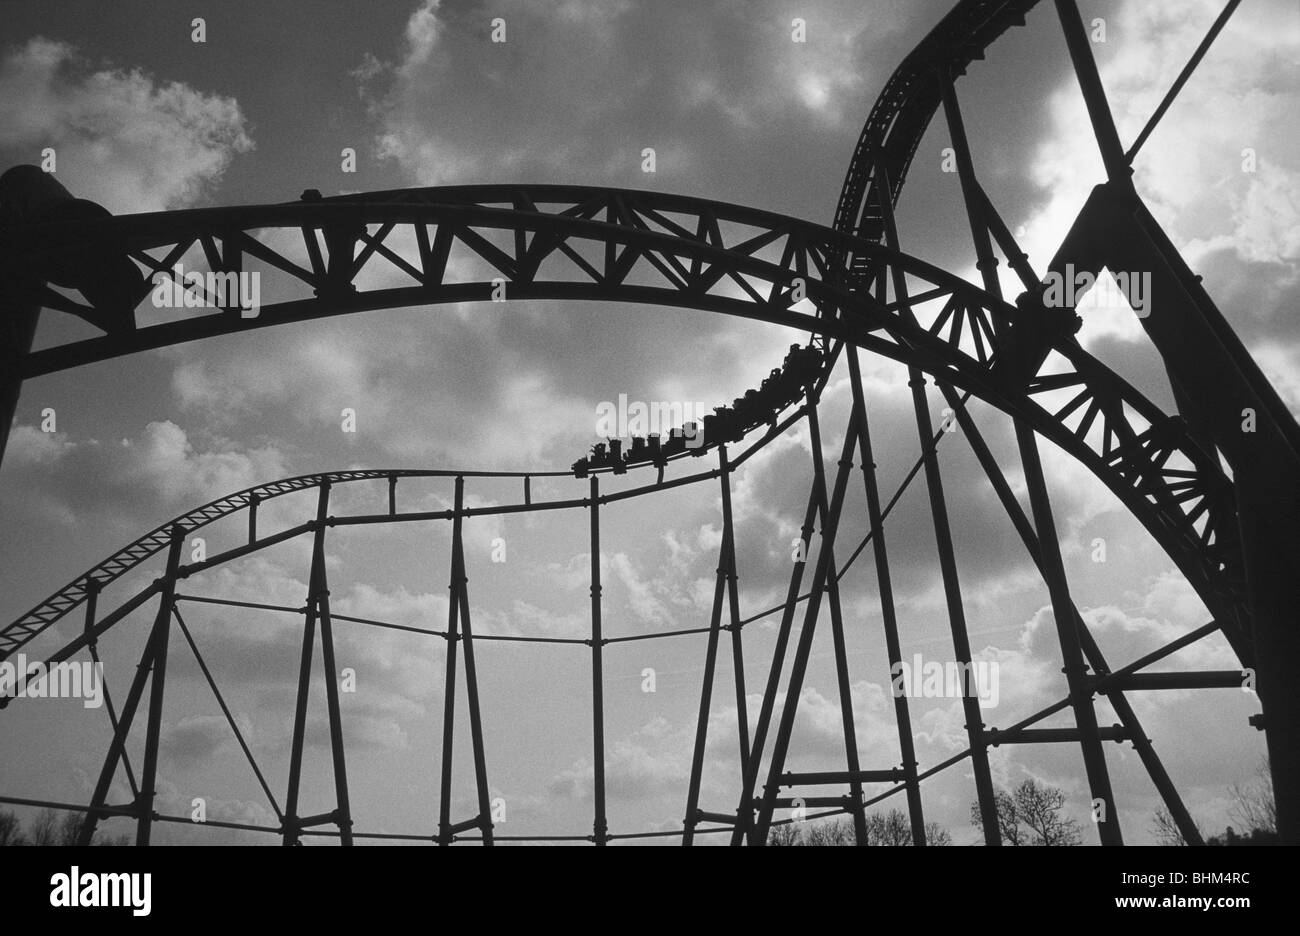 Silhouette Rollercoaster Stock Photos & Silhouette Rollercoaster Stock ...